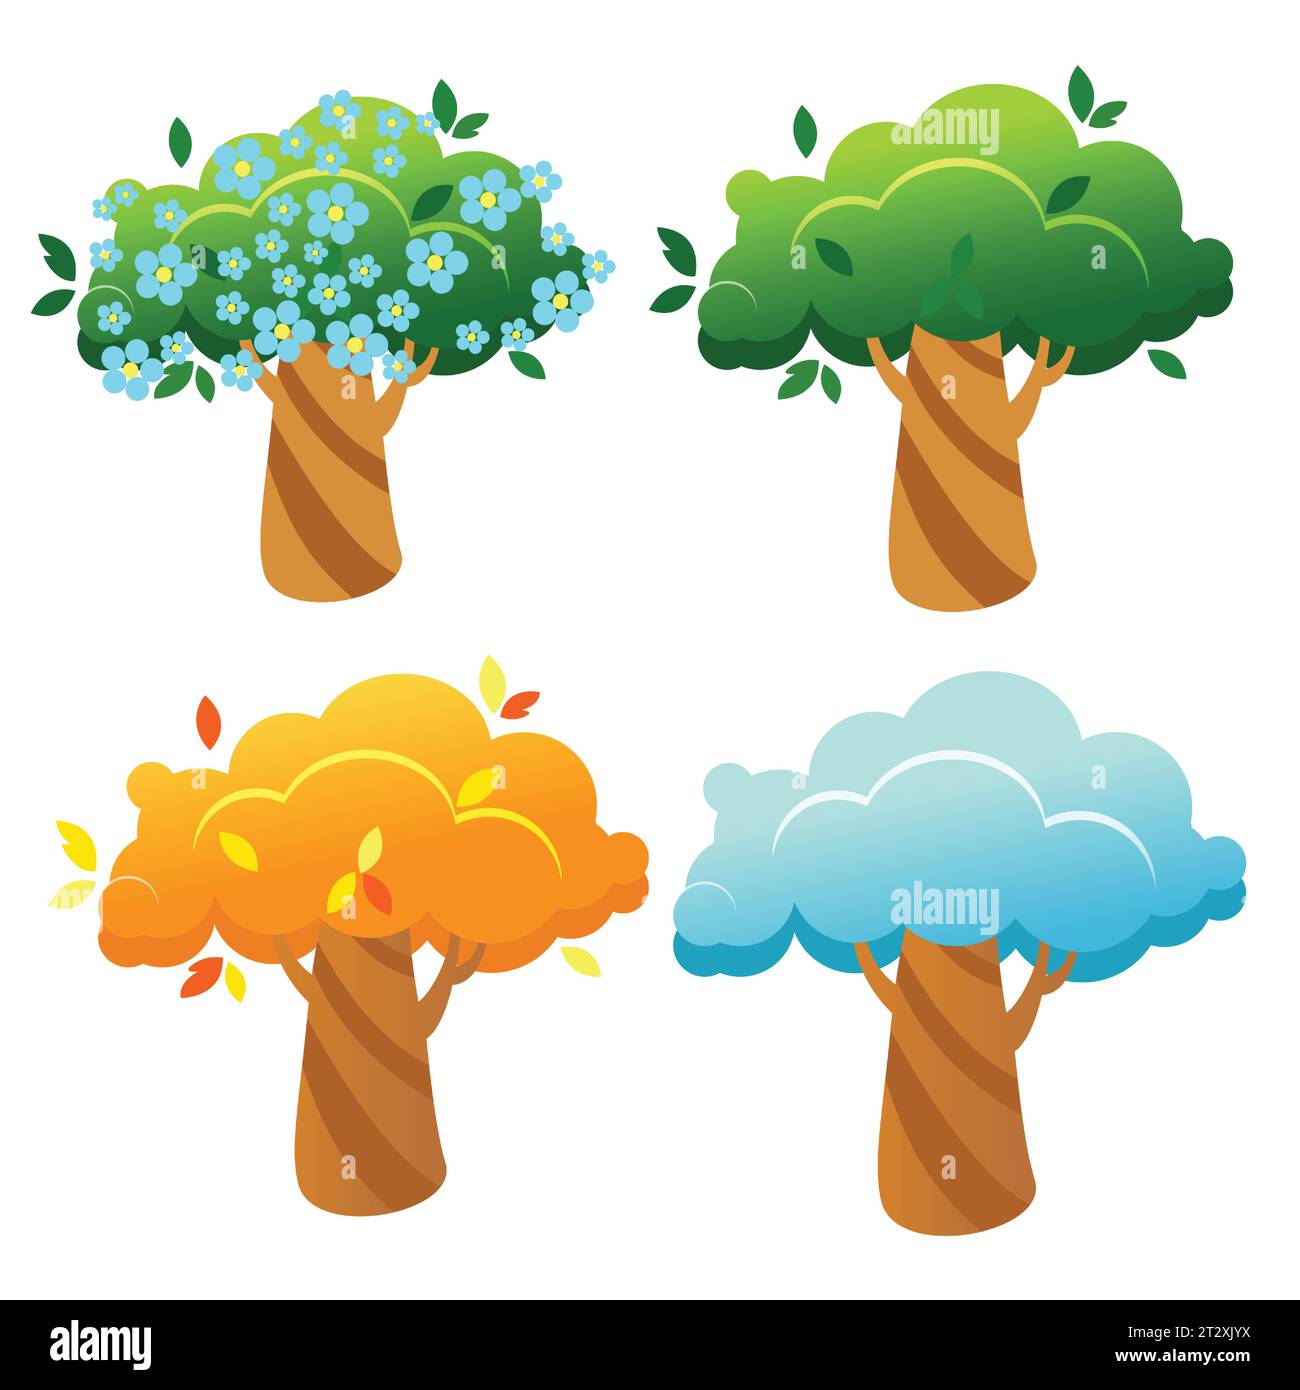 Set of trees of different seasons. Winter, spring, summer and autumn trees in cartoon style isolated on white background. Stock Vector